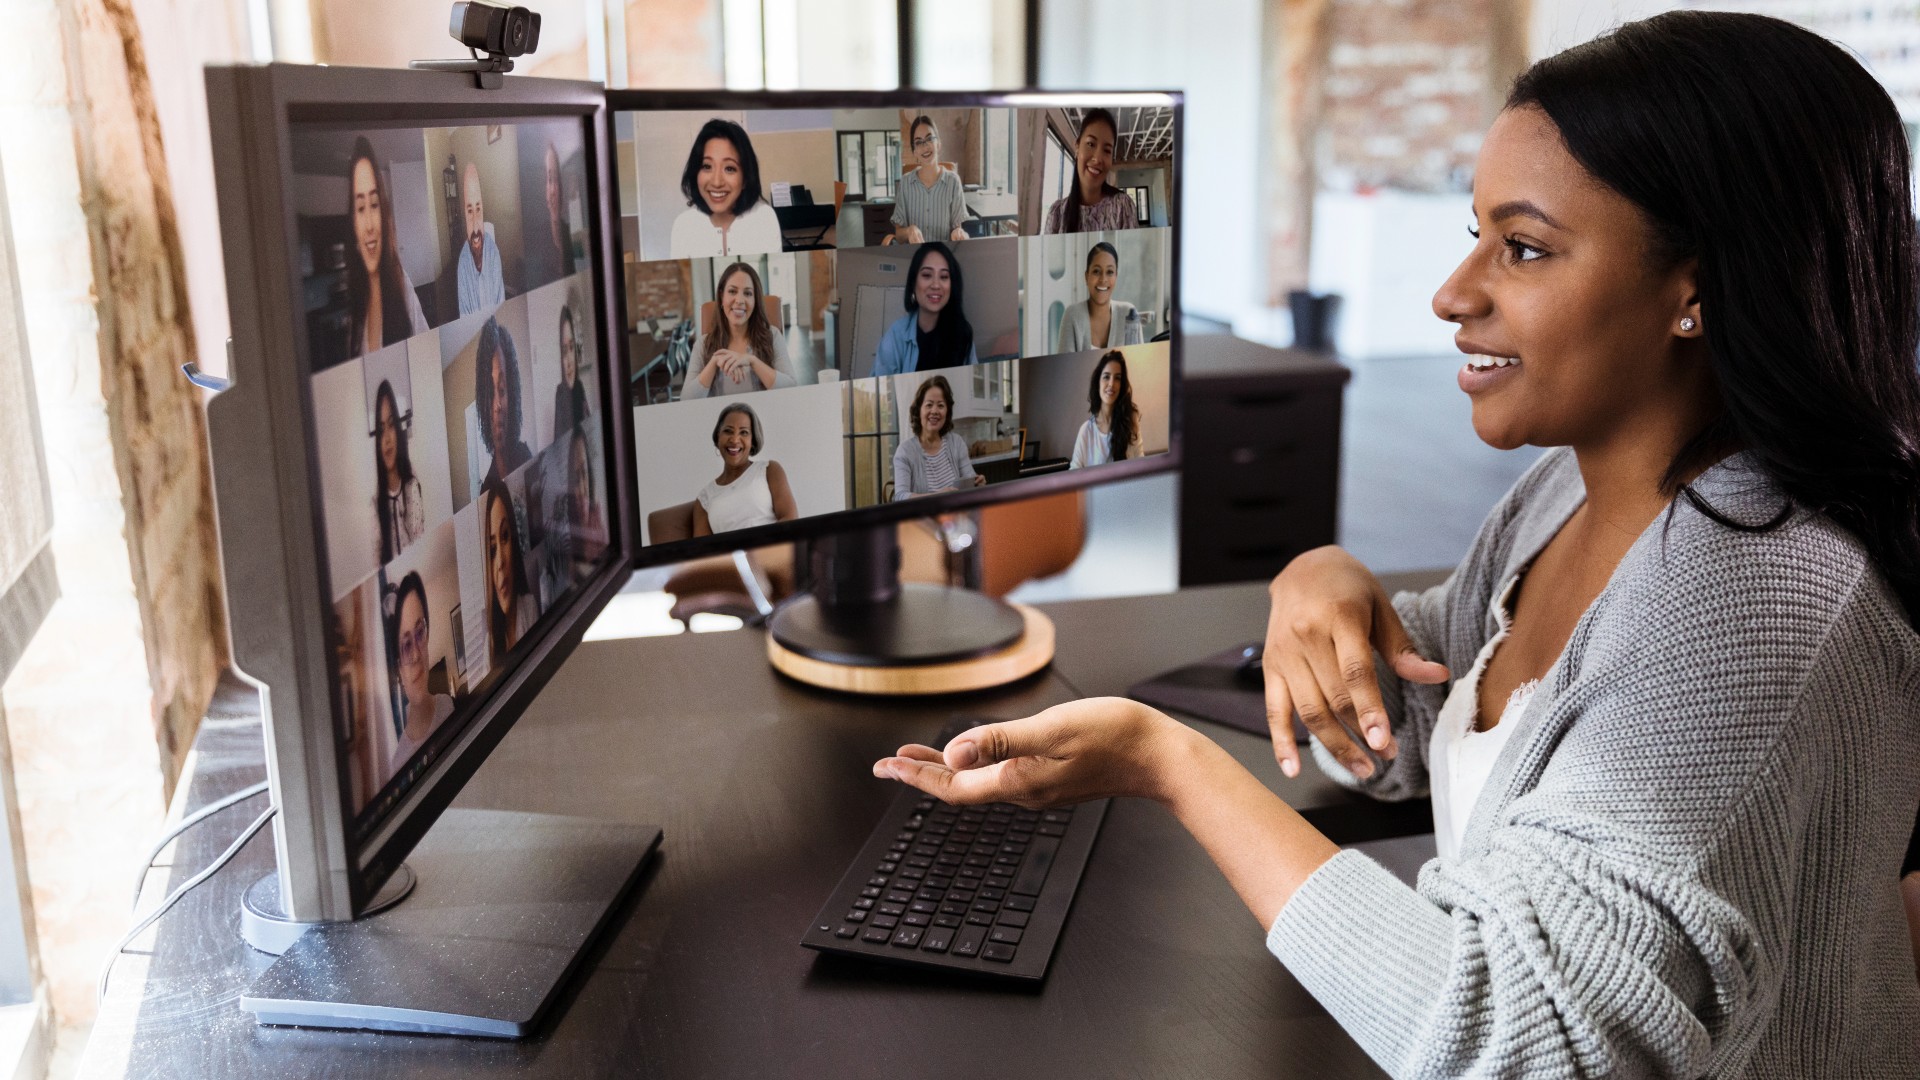 Woman on a video call with several other people showing on the monitors.